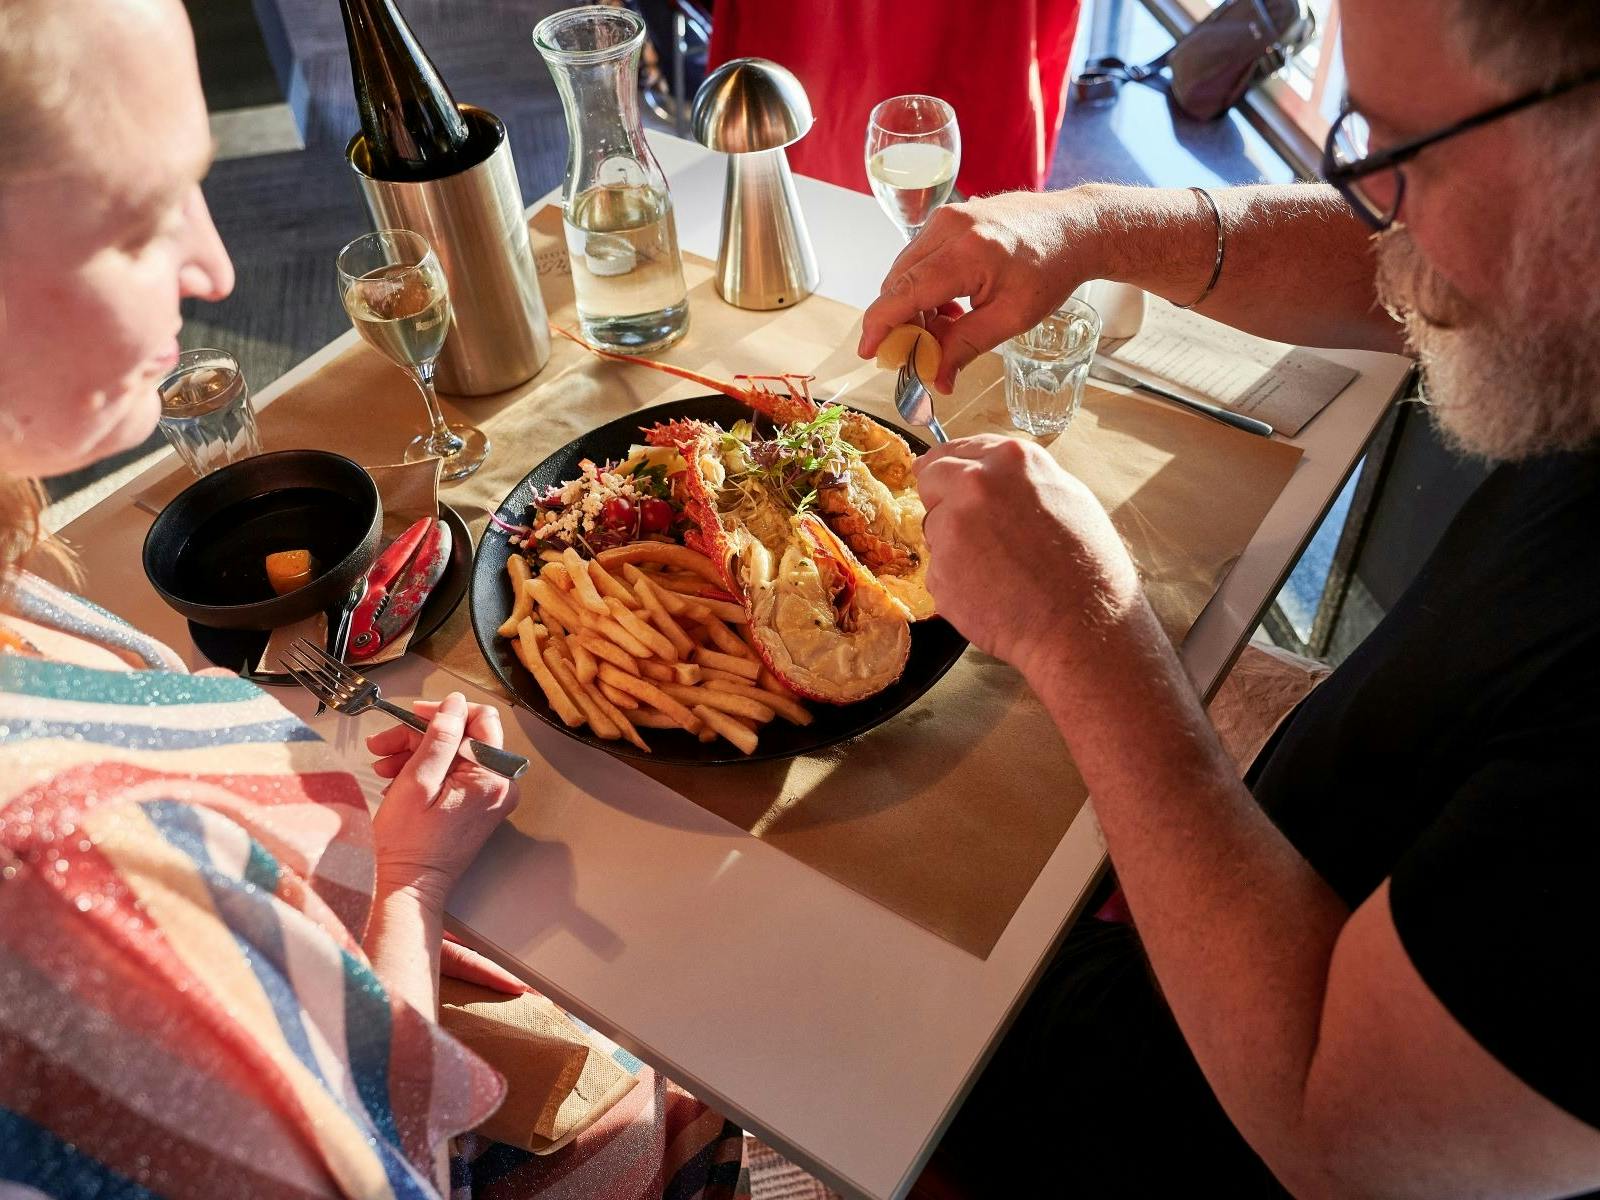 A couple sitting at a table are served a plate of lobster and fresh seafood.